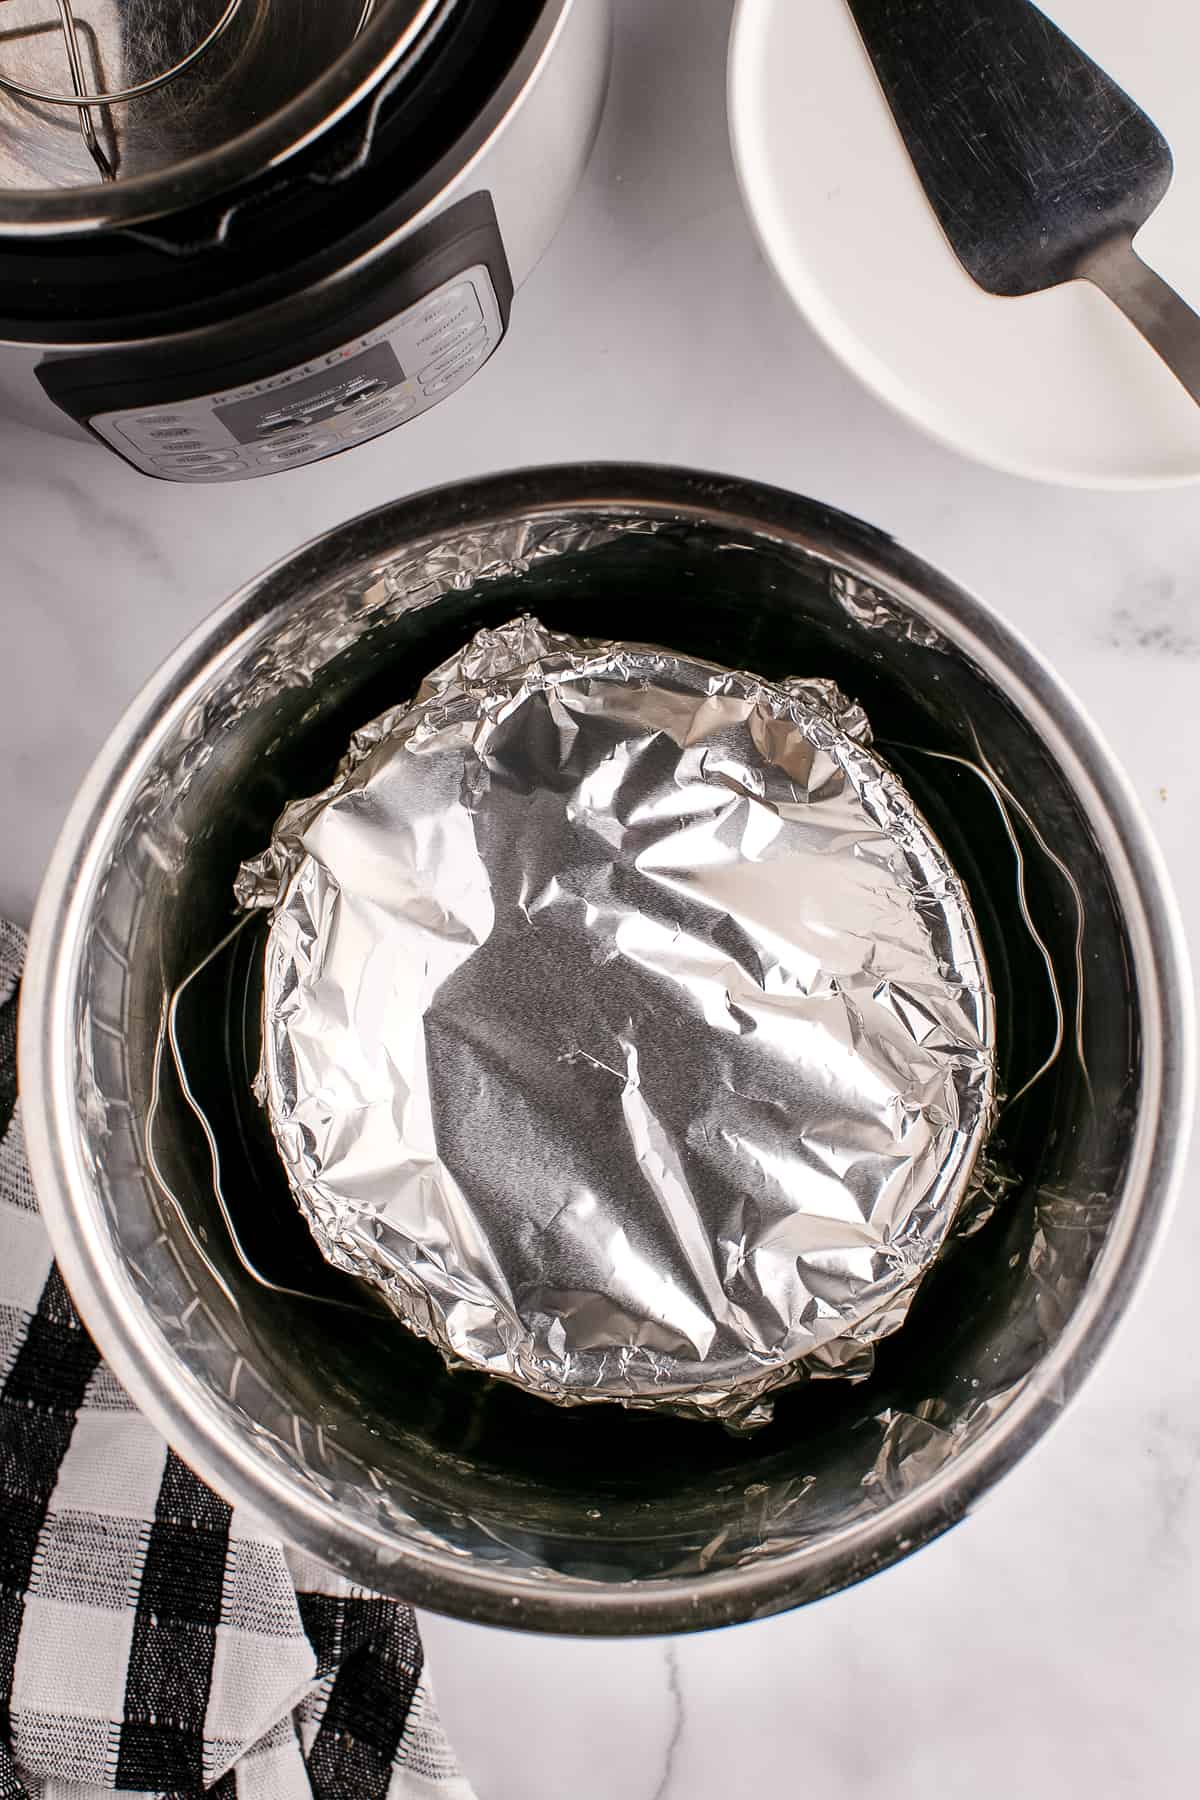 Cheesecake covered in aluminum foil in Instant Pot